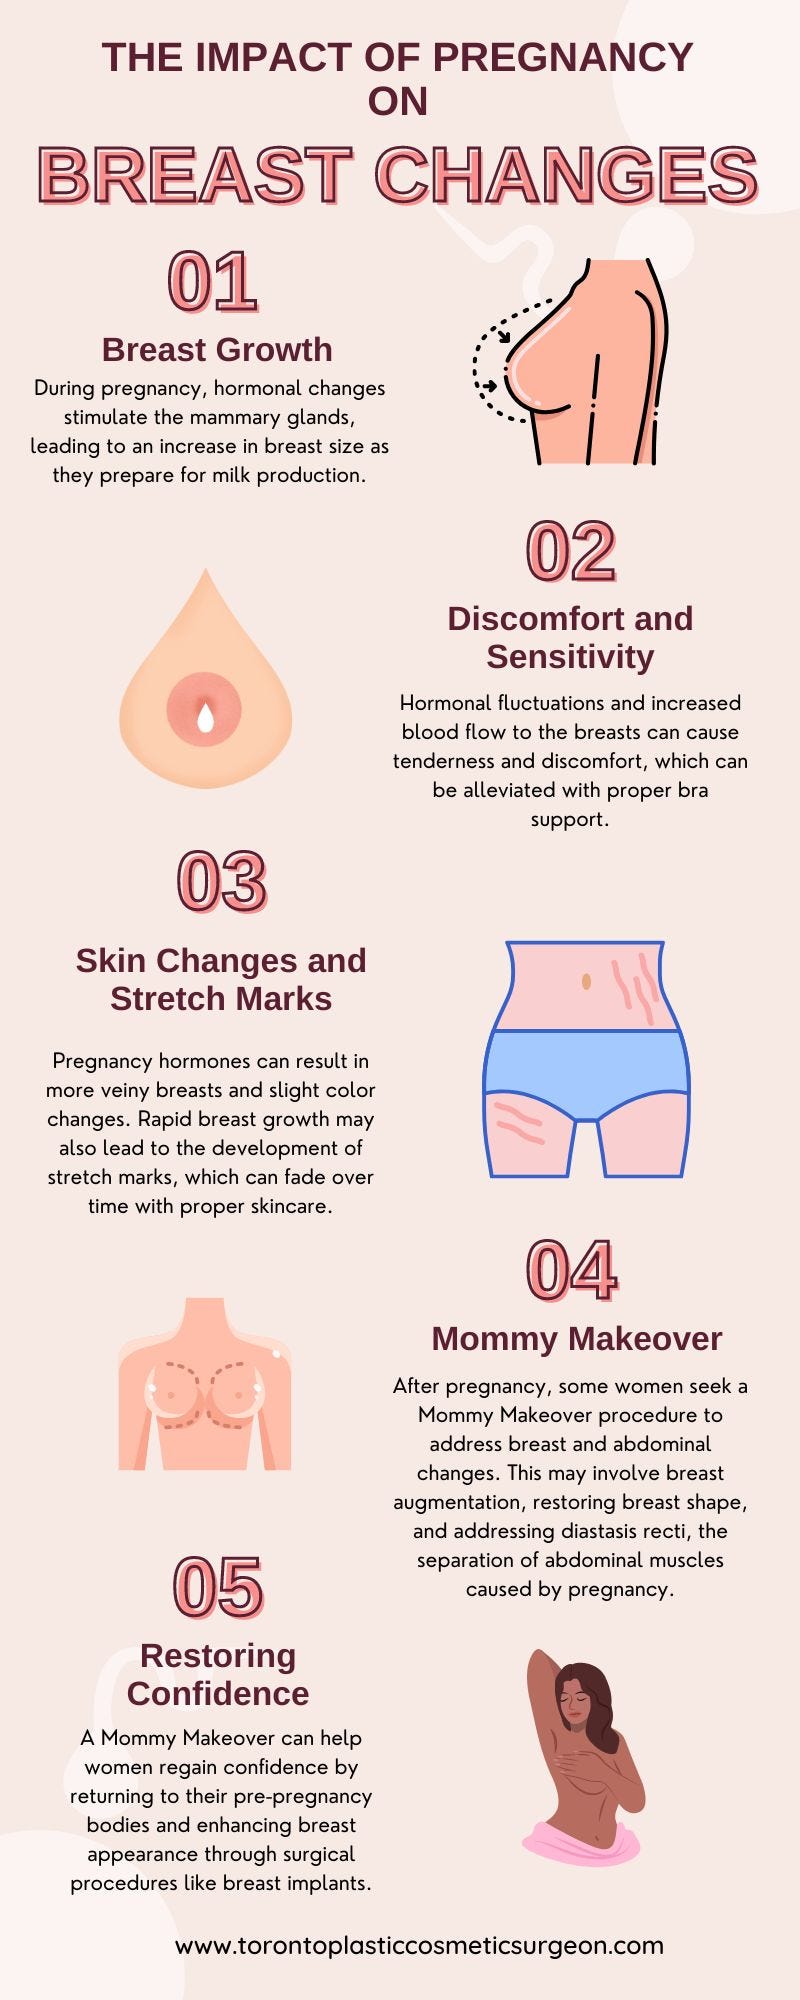 Breast changes during or after pregnancy